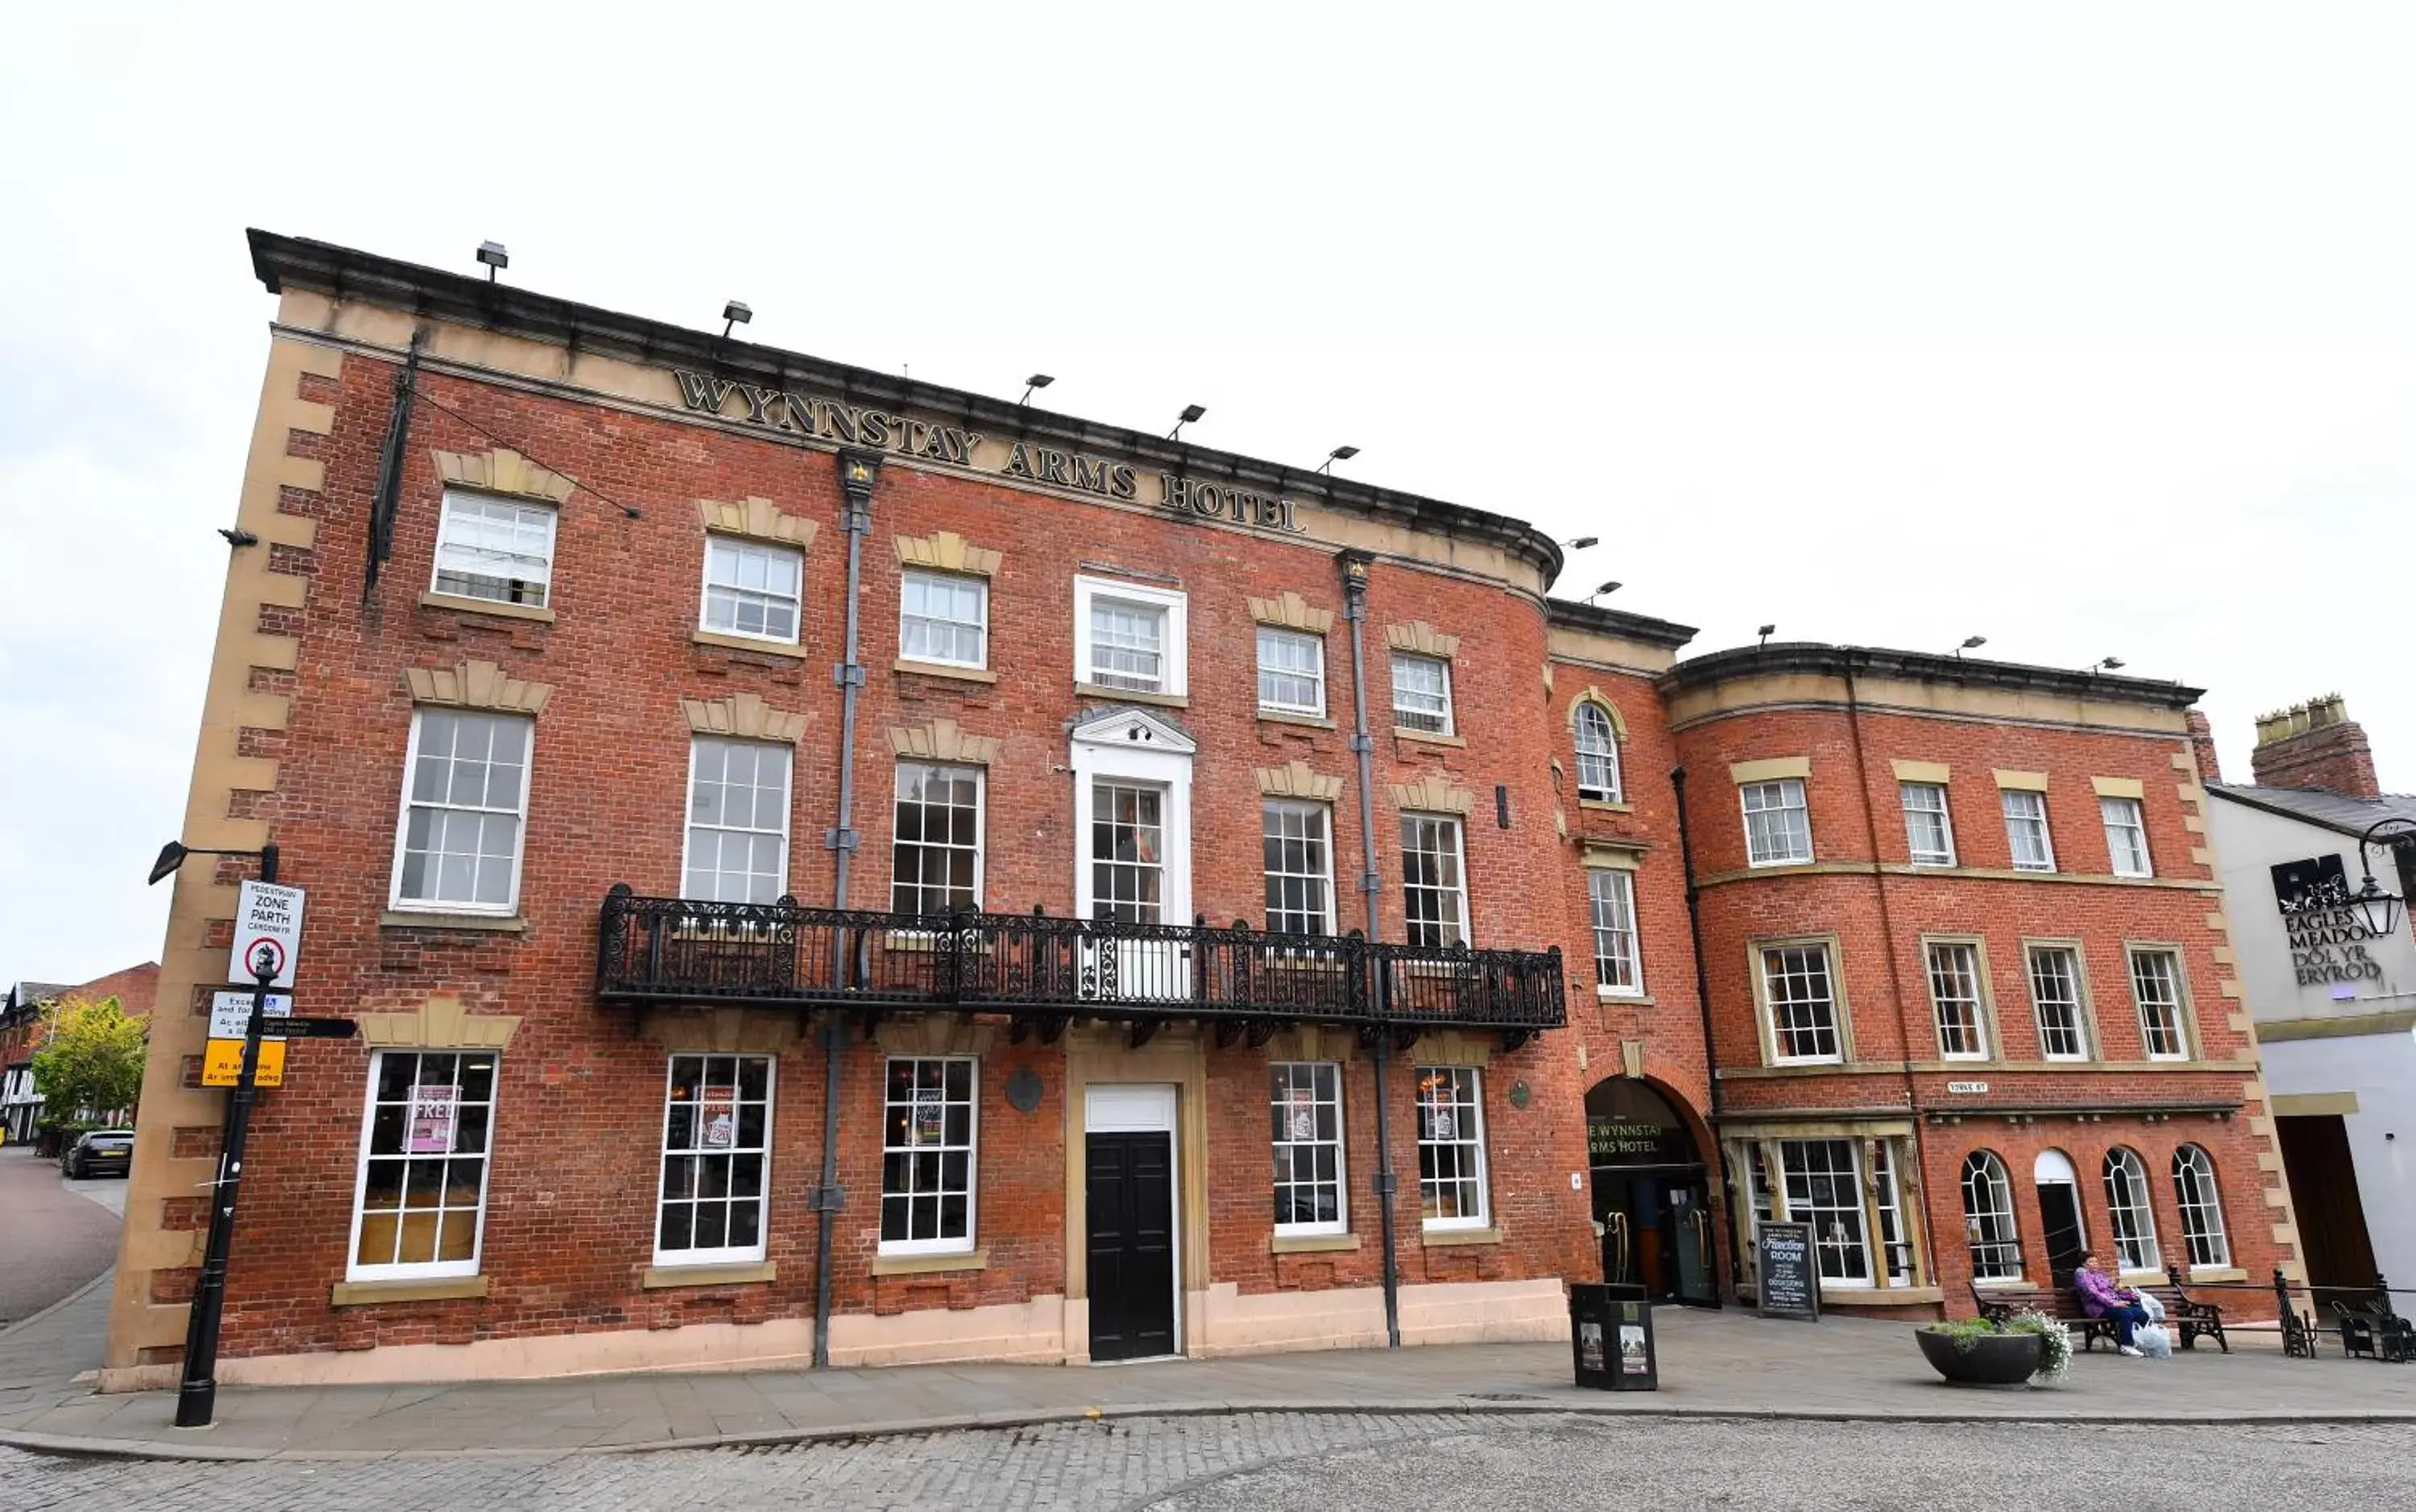 Property building in Wynnstay Arms, Wrexham by Marston's Inns